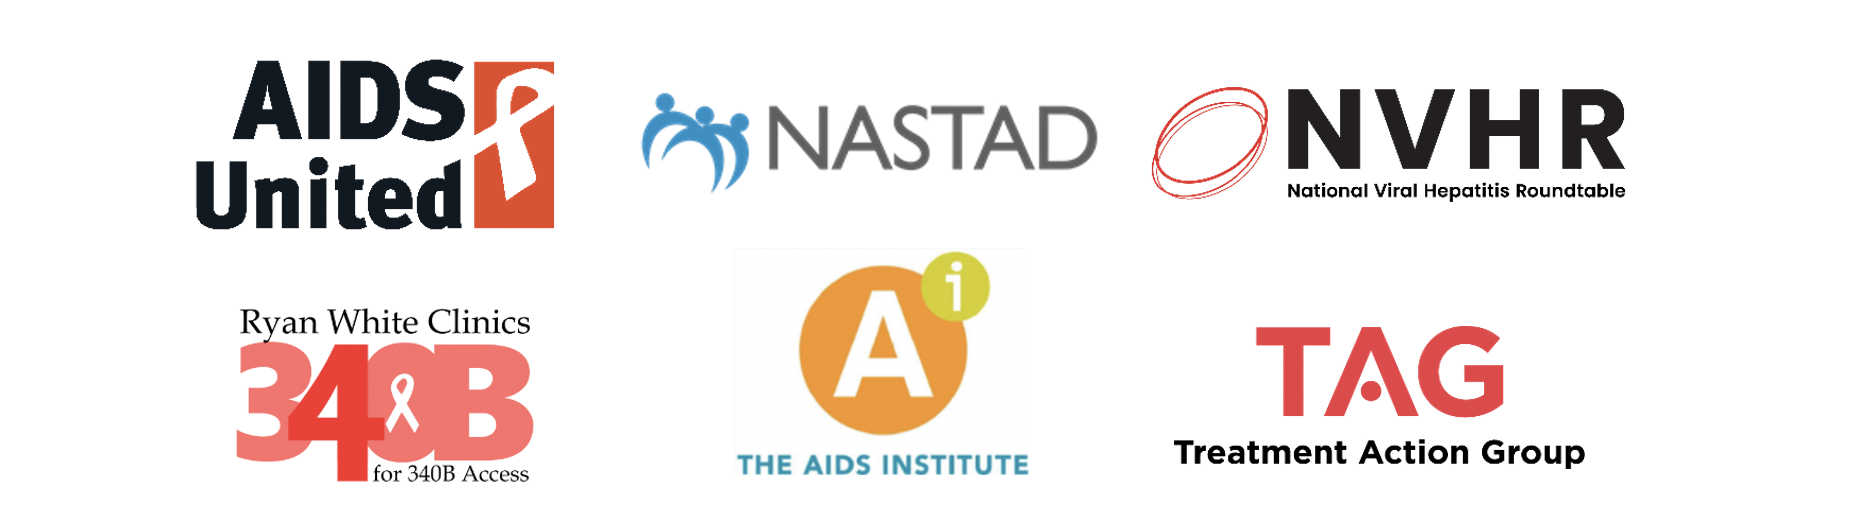 logo montage showing: AIDS United, NASTAD, National Viral Hepatitis Roundtable, Ryan White Clinics for 340B Access, The AIDS Institute, Treatment Action Group